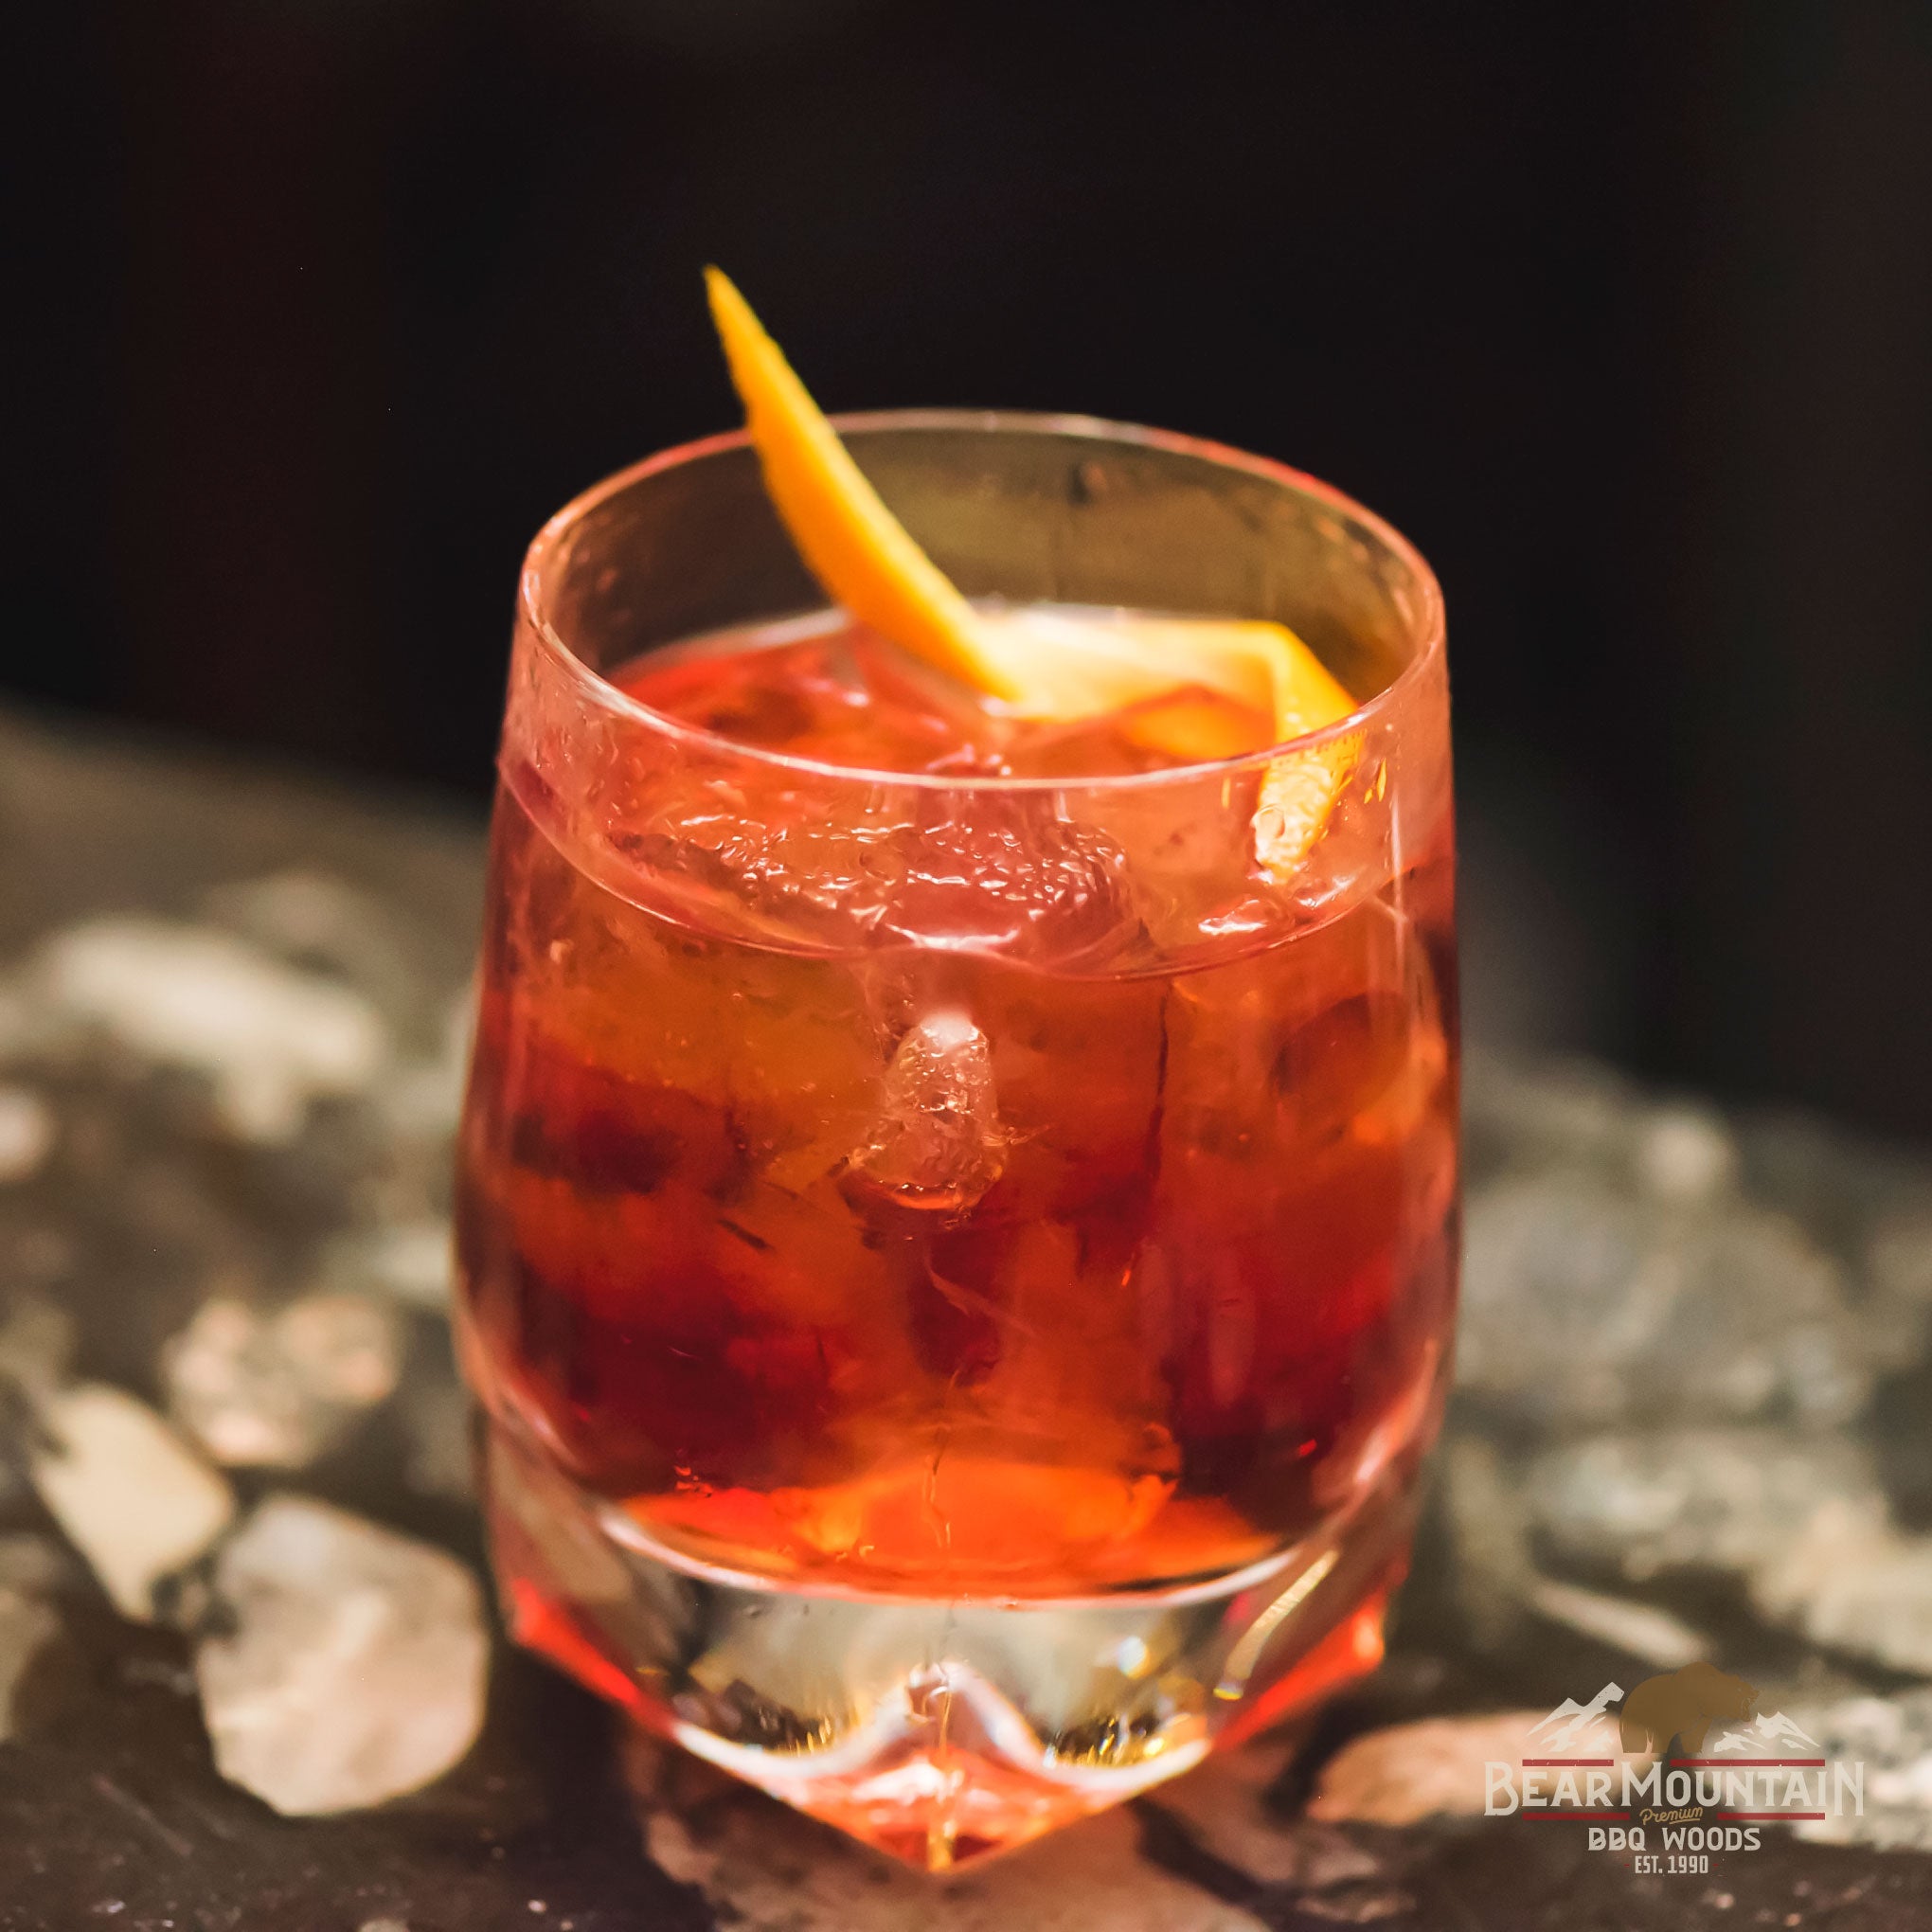 Old Fashioned with Infused Ice Cubes - Stef's Eats and Sweets